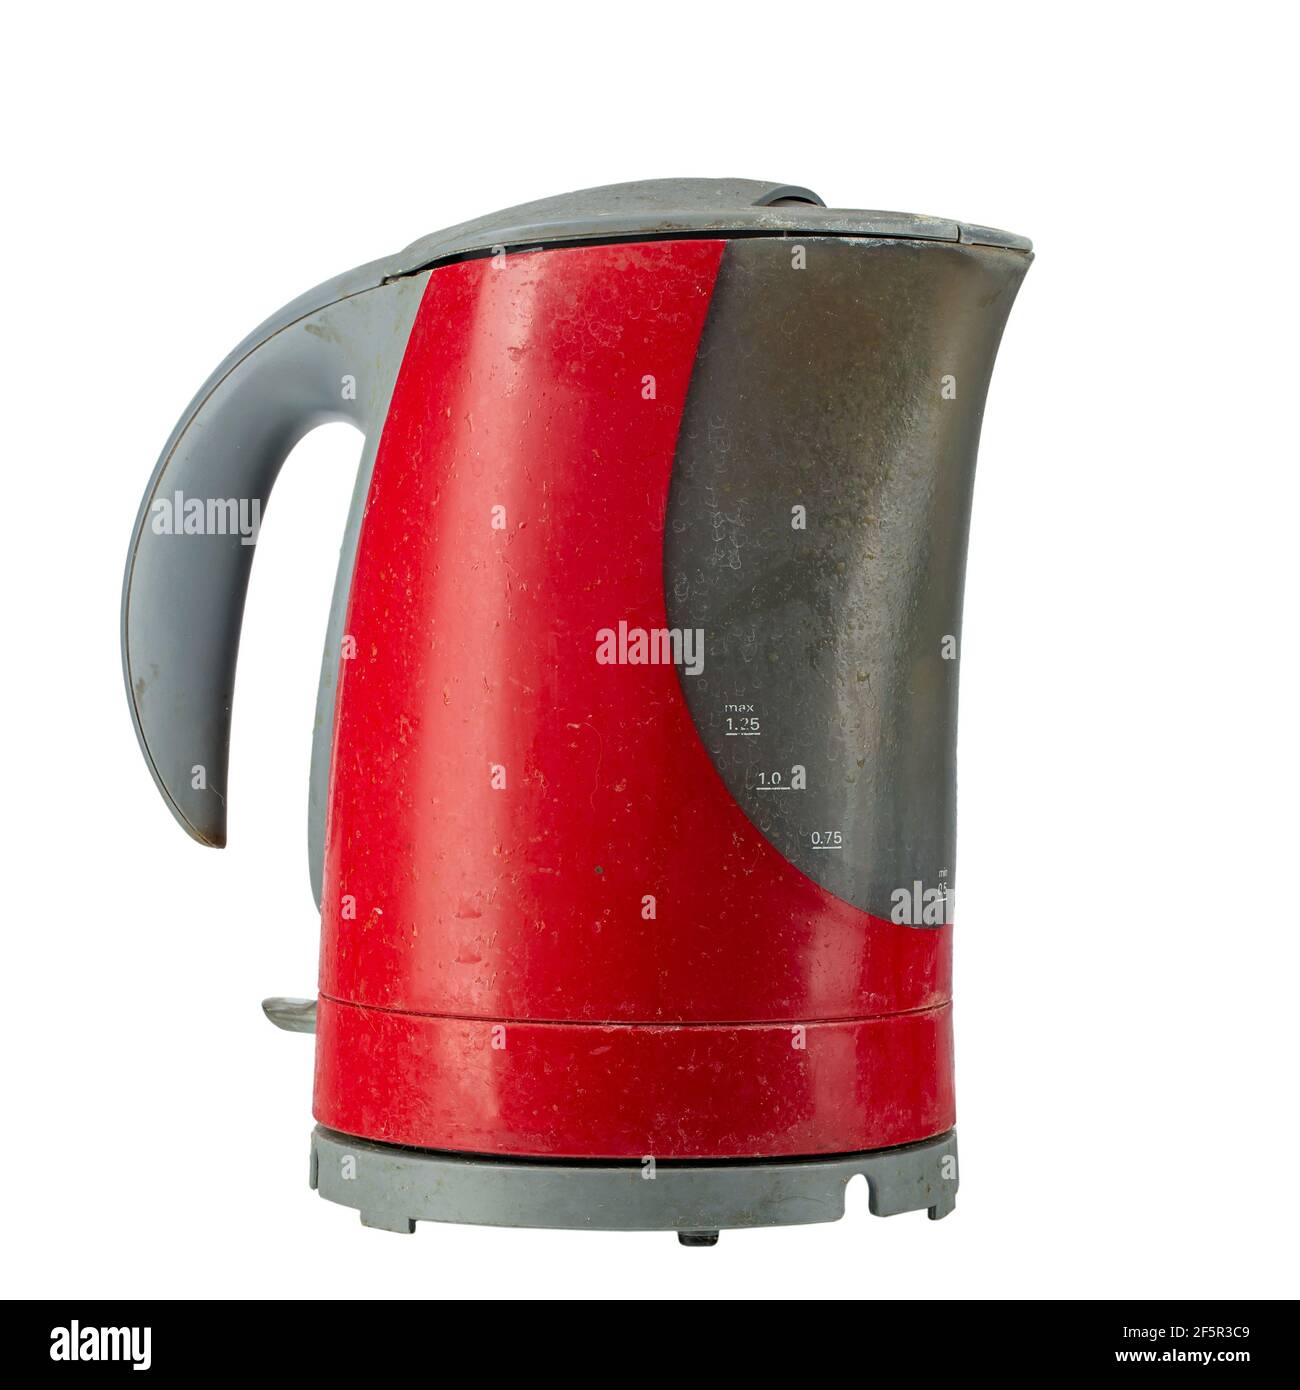 https://c8.alamy.com/comp/2F5R3C9/dirty-electric-kettle-of-red-color-isolated-on-white-background-small-kitchen-electrical-appliances-file-contains-clipping-path-2F5R3C9.jpg